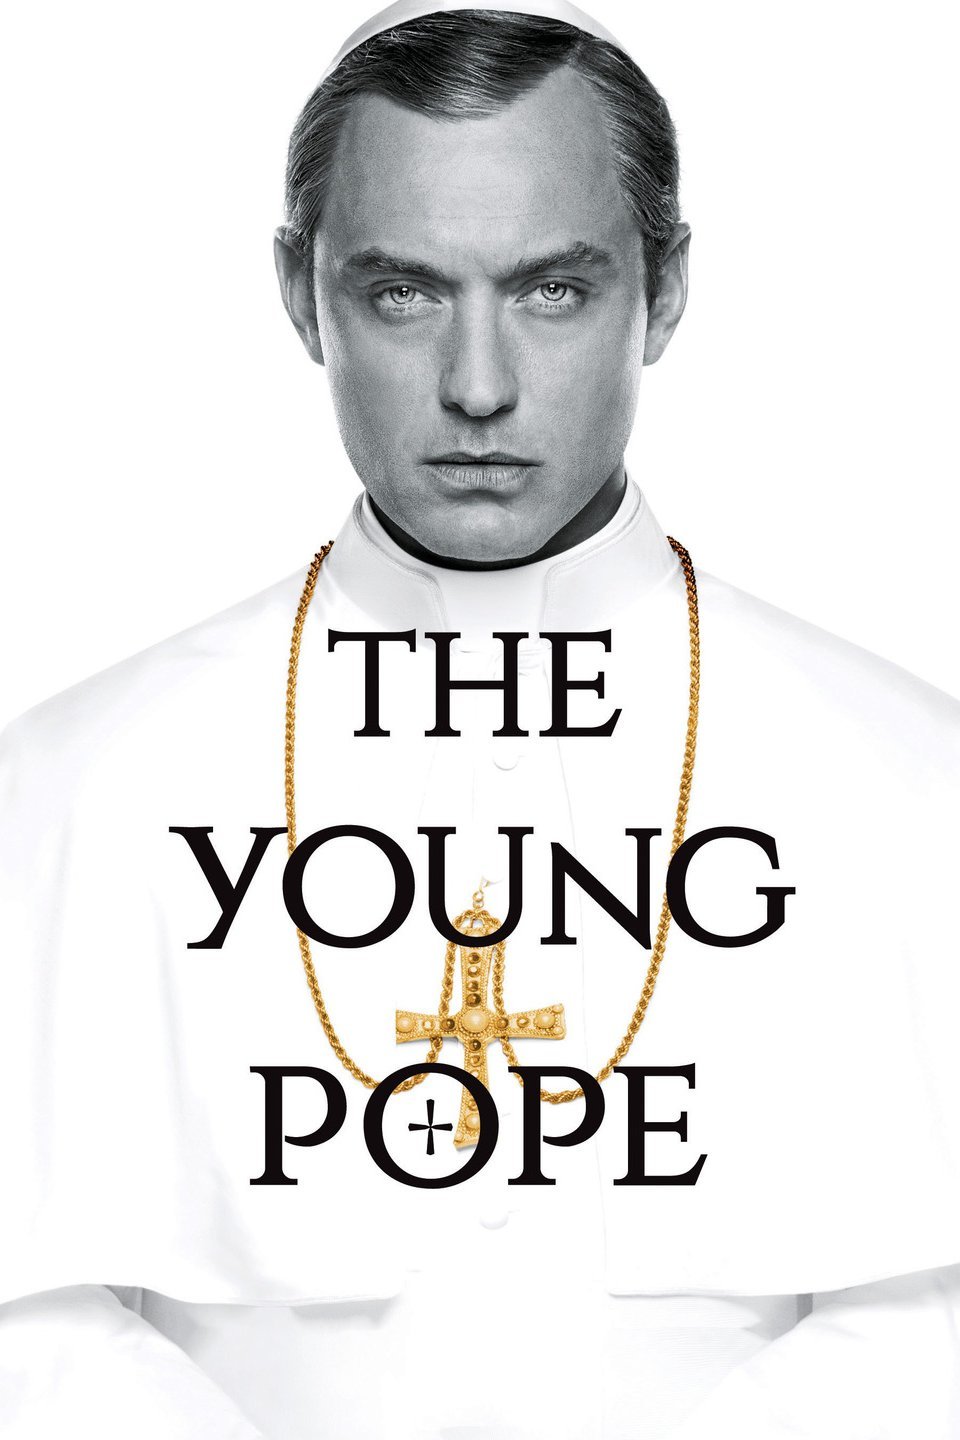 The Young Pope - Rotten